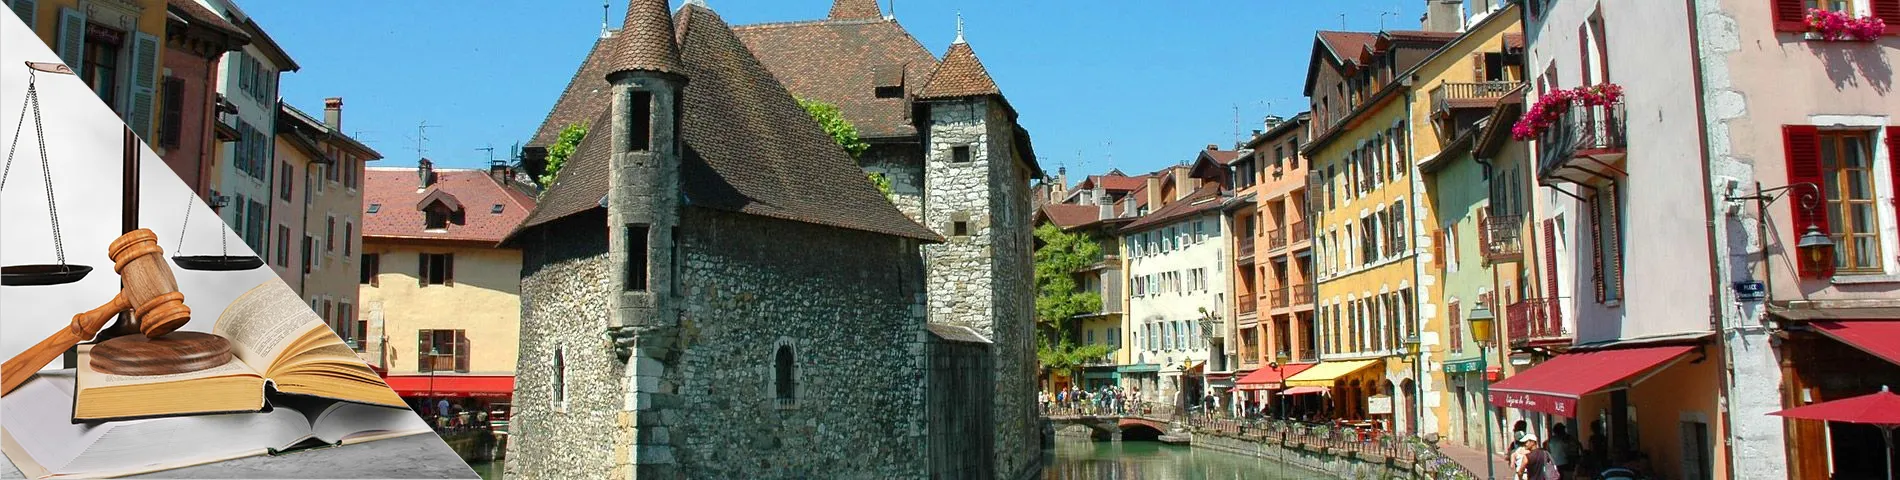 Annecy - French for Lawyers